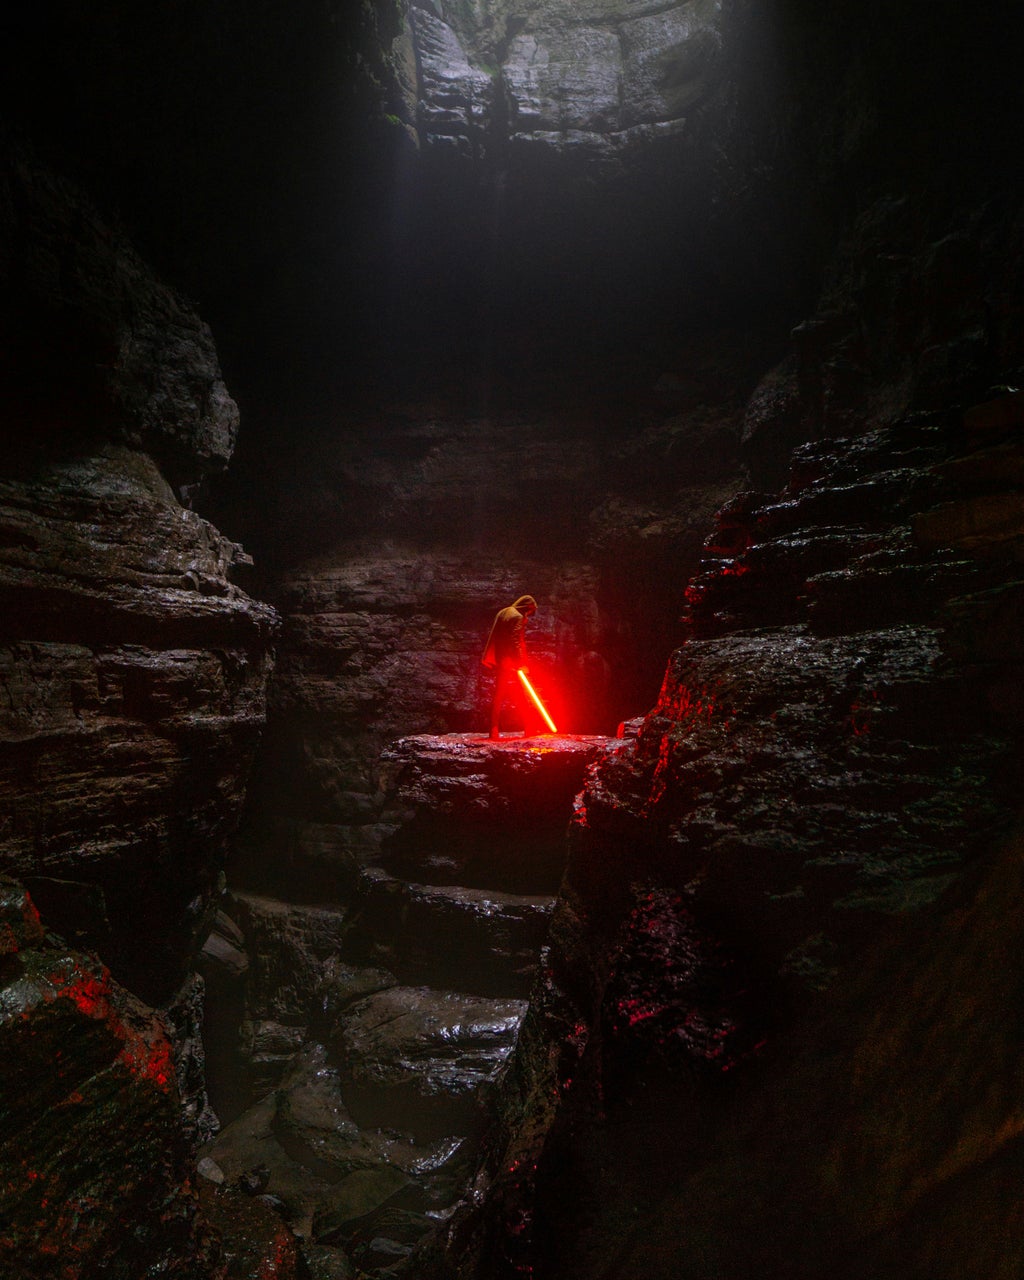 A lone figure stands in the middle of a cave holding a red lightsaber.